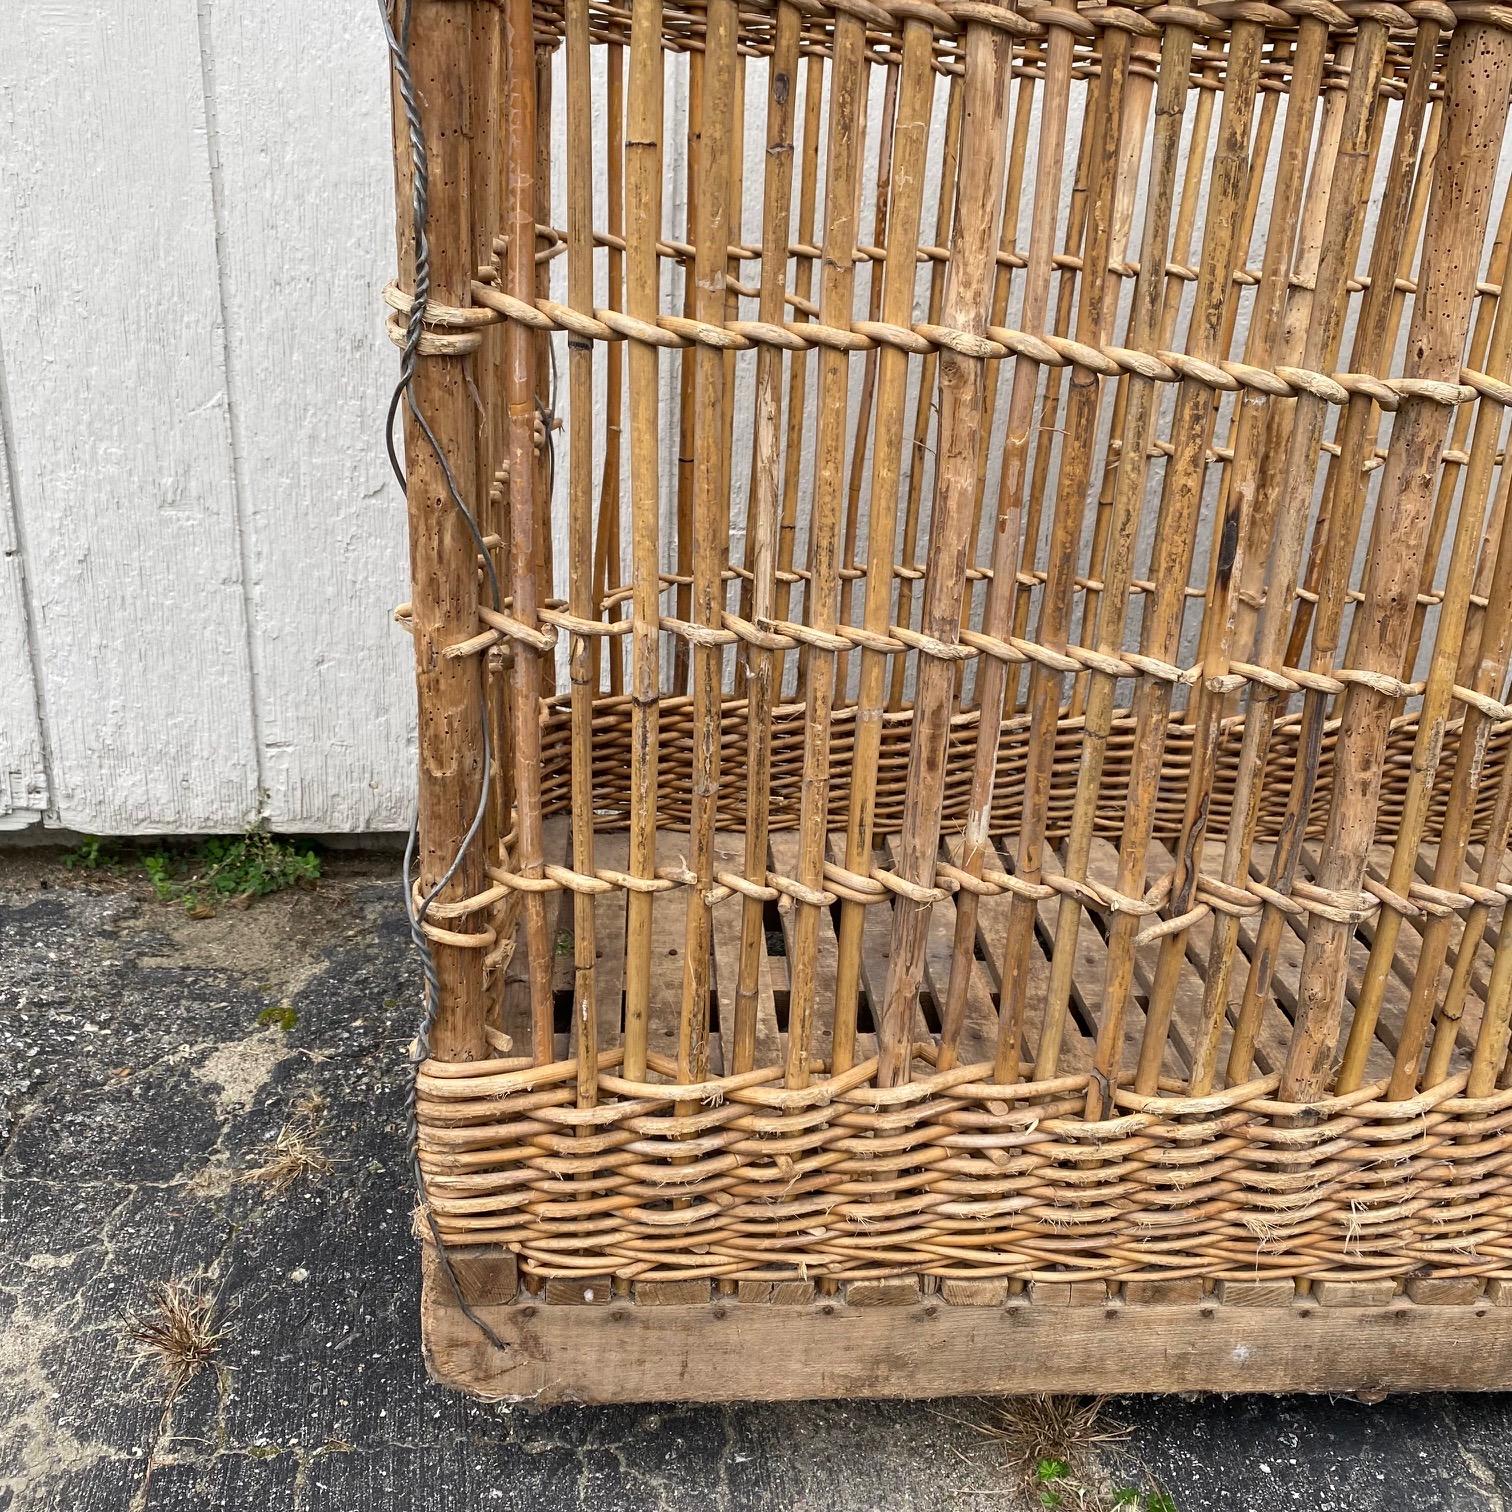 Early 20th Century  French Very Large Boulangerie or Bakery Industrial Woven Cart Basket on Wheels